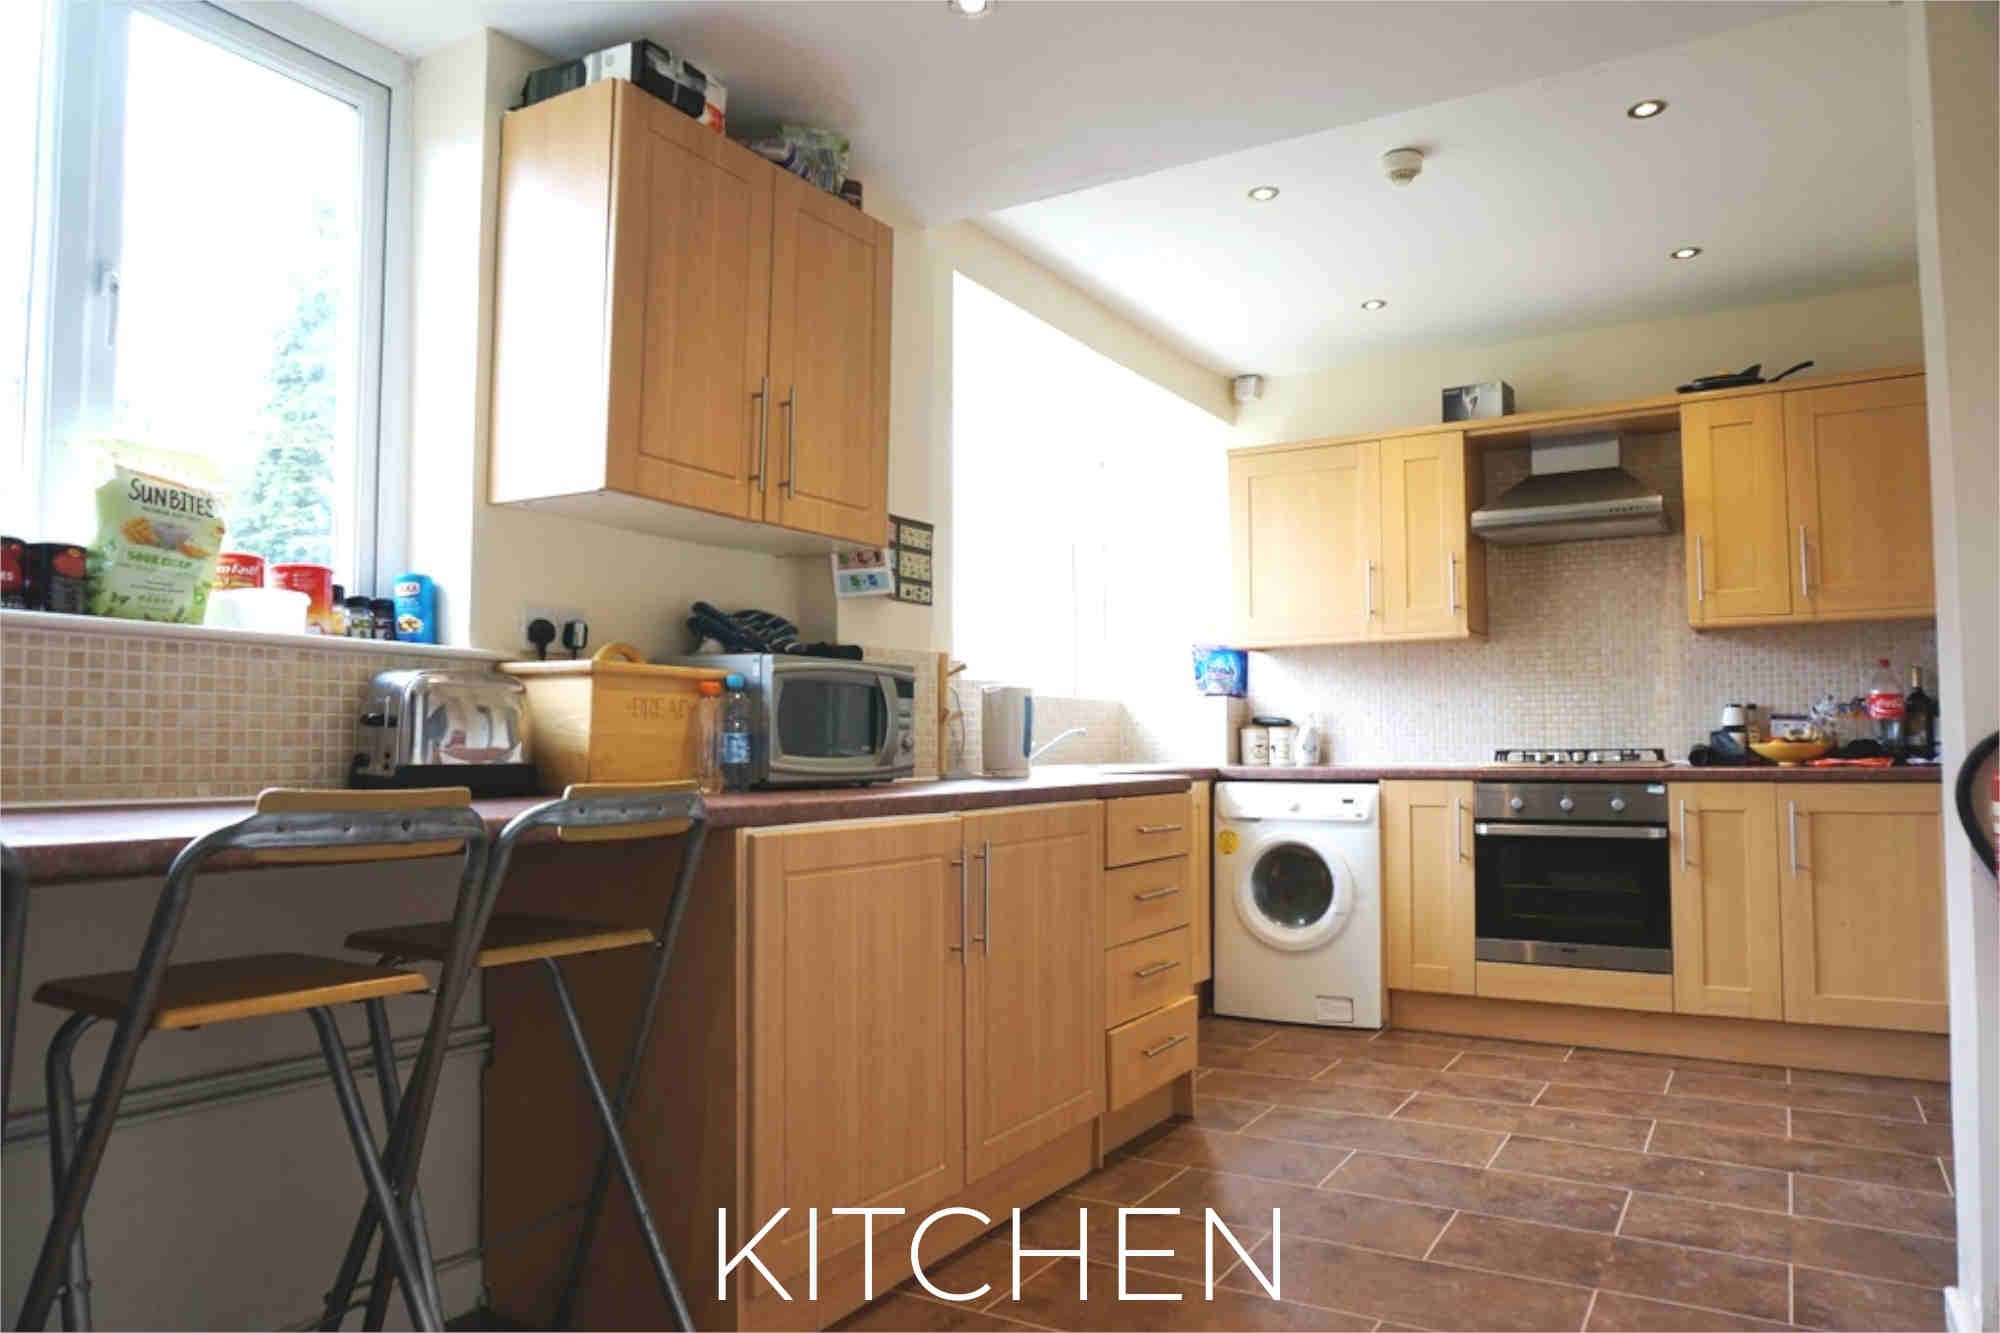 kitchen from low level 7 caxton road